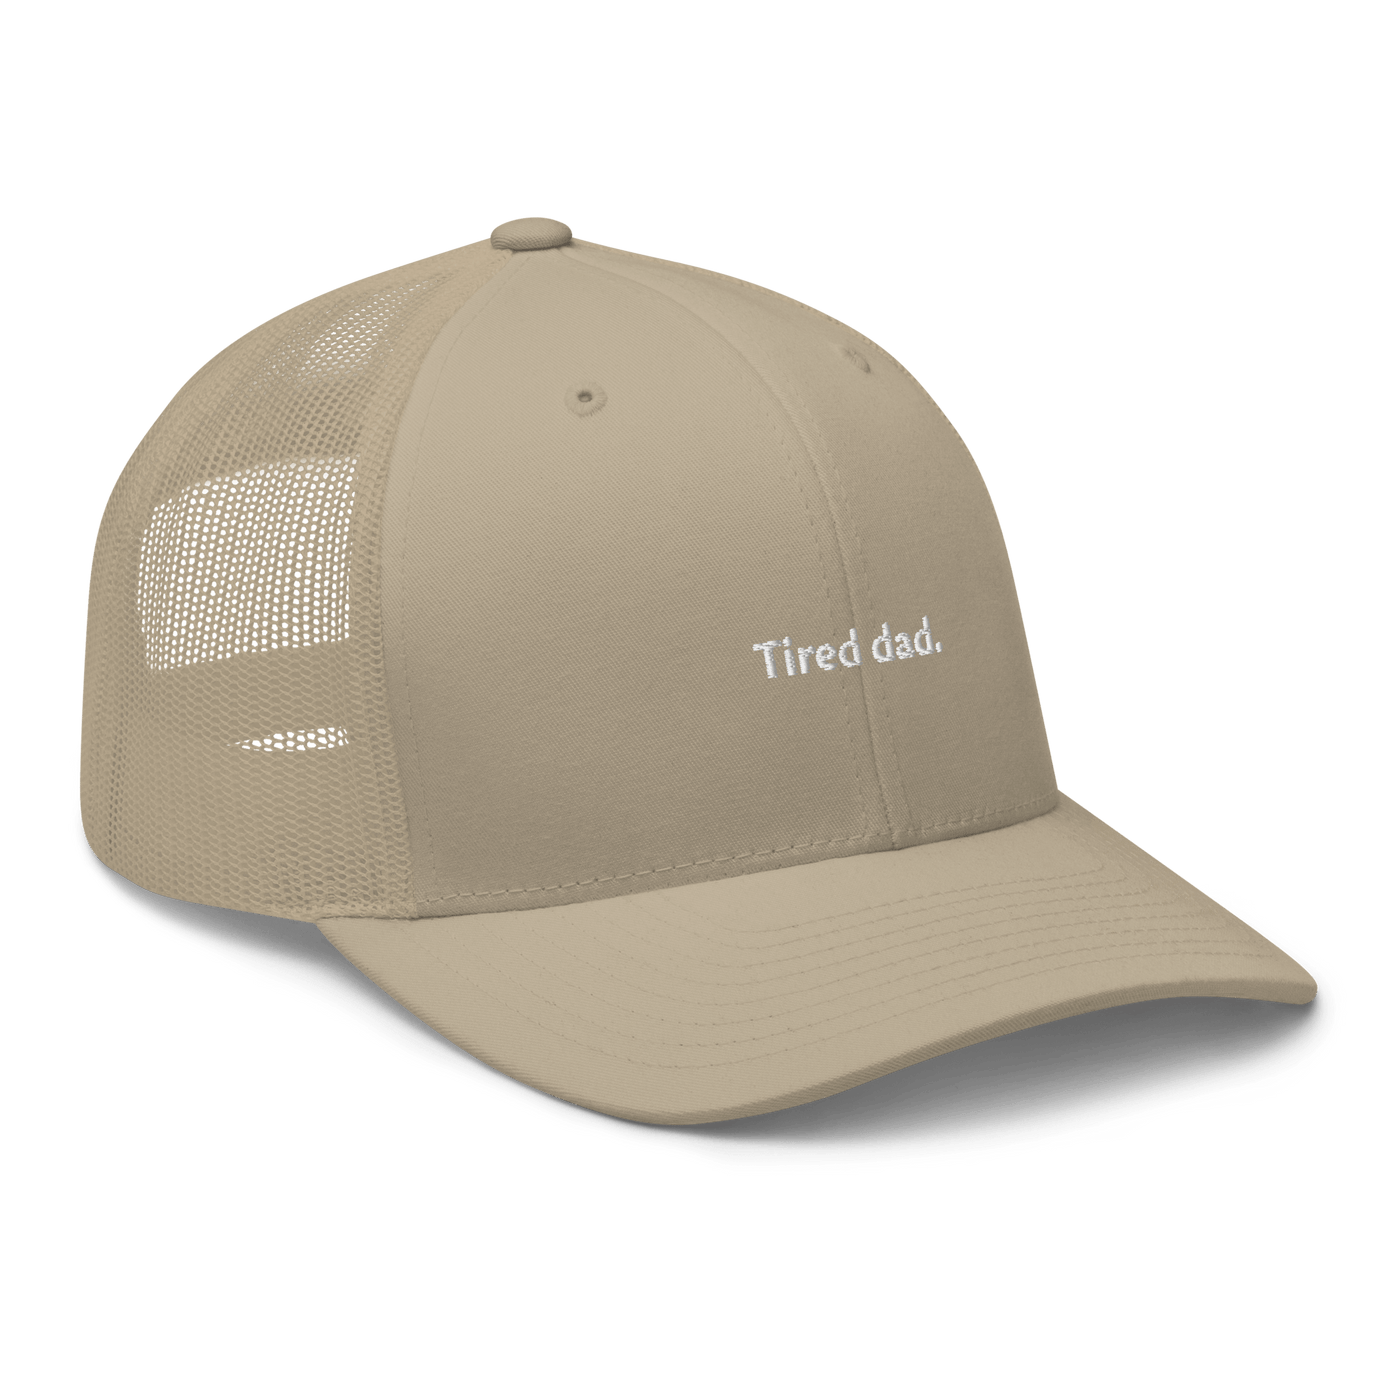 Tired dad Trucker Cap - Khaki - - Just Another Cap Store